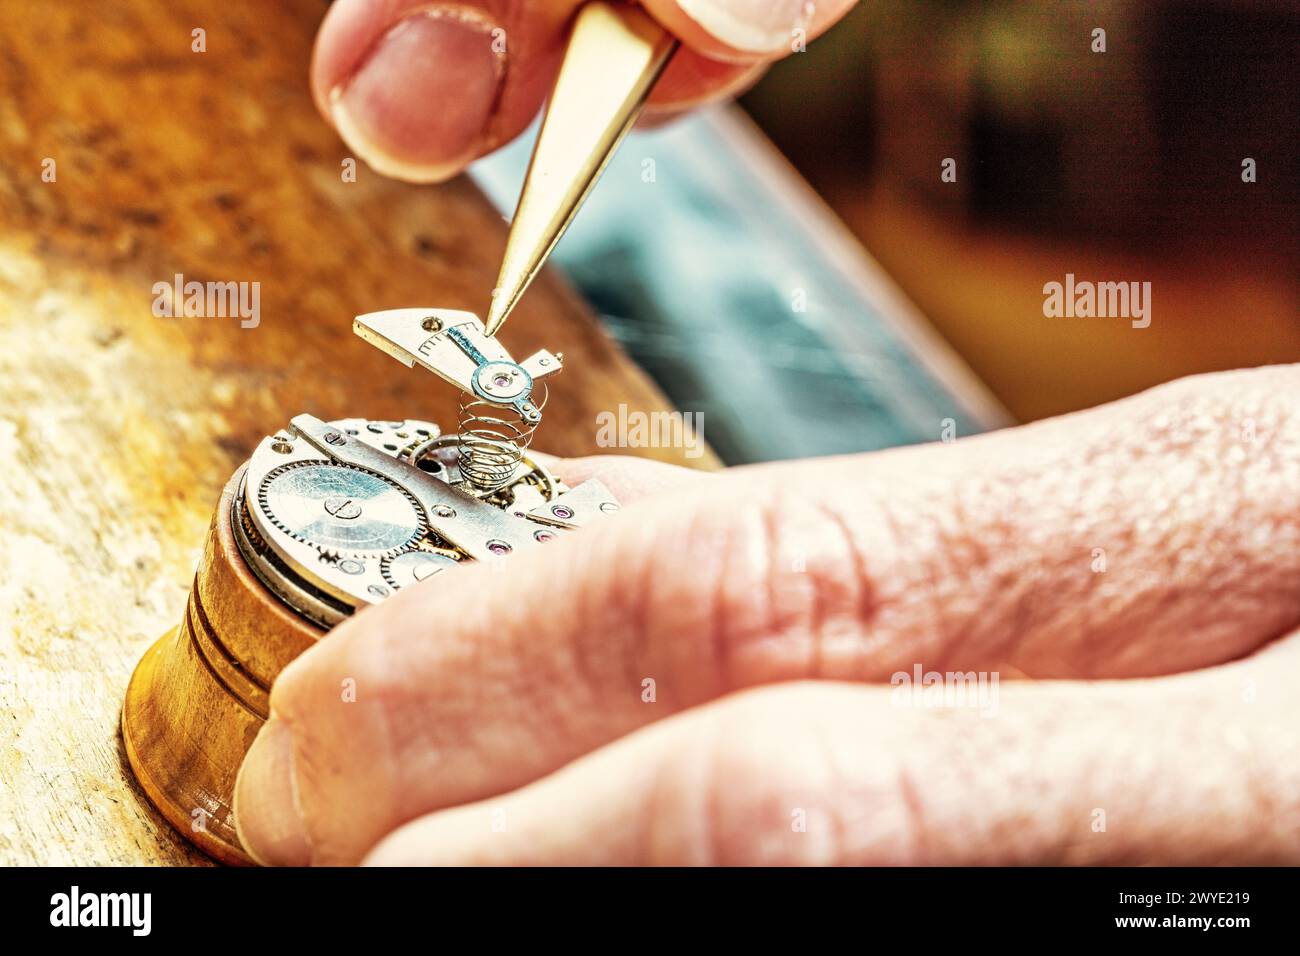 Skilled hands bring life to metal, as the heart of a watch is finely tuned Stock Photo